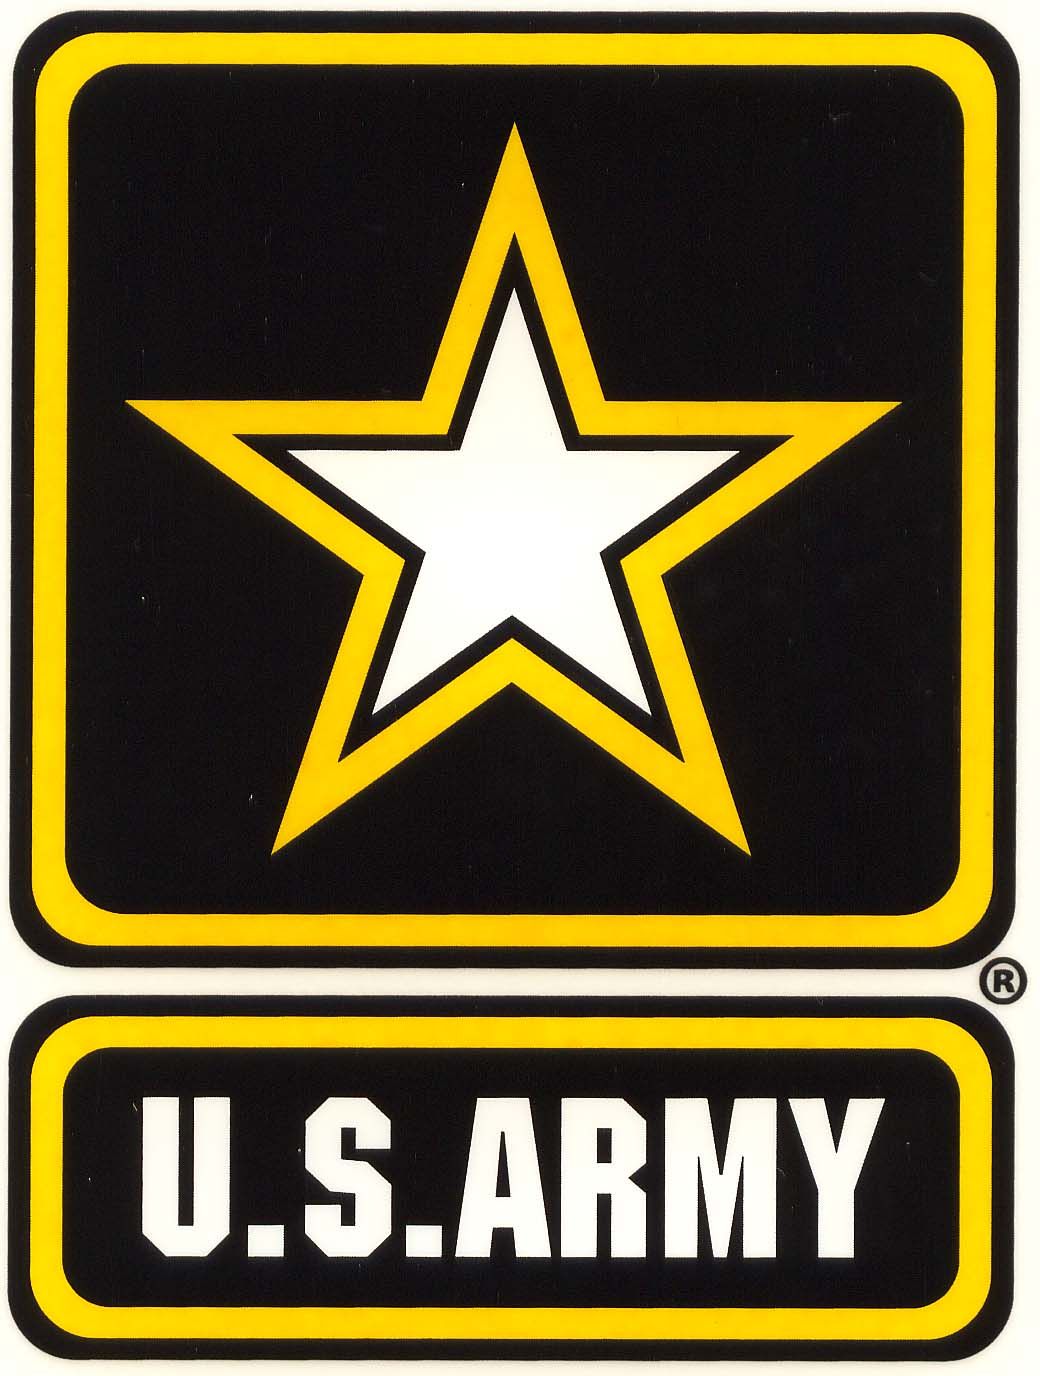 Us Army Logo 10602 Hd Wallpapers in Logos - Imagesci. - ClipArt ...